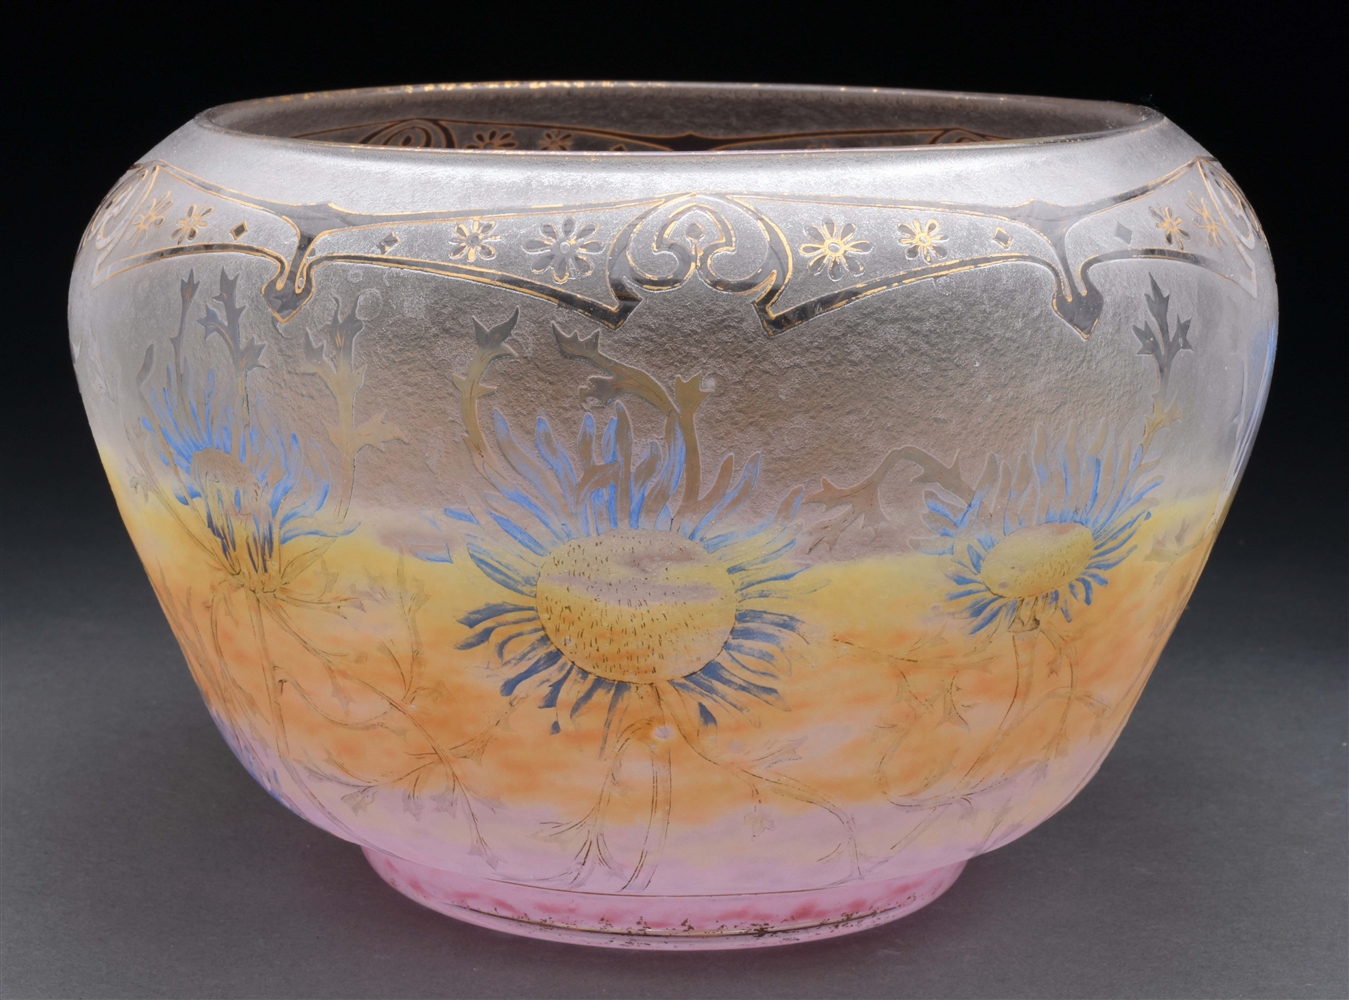 DAUM CAMEO AND ENAMELED THISTLE BOWL.